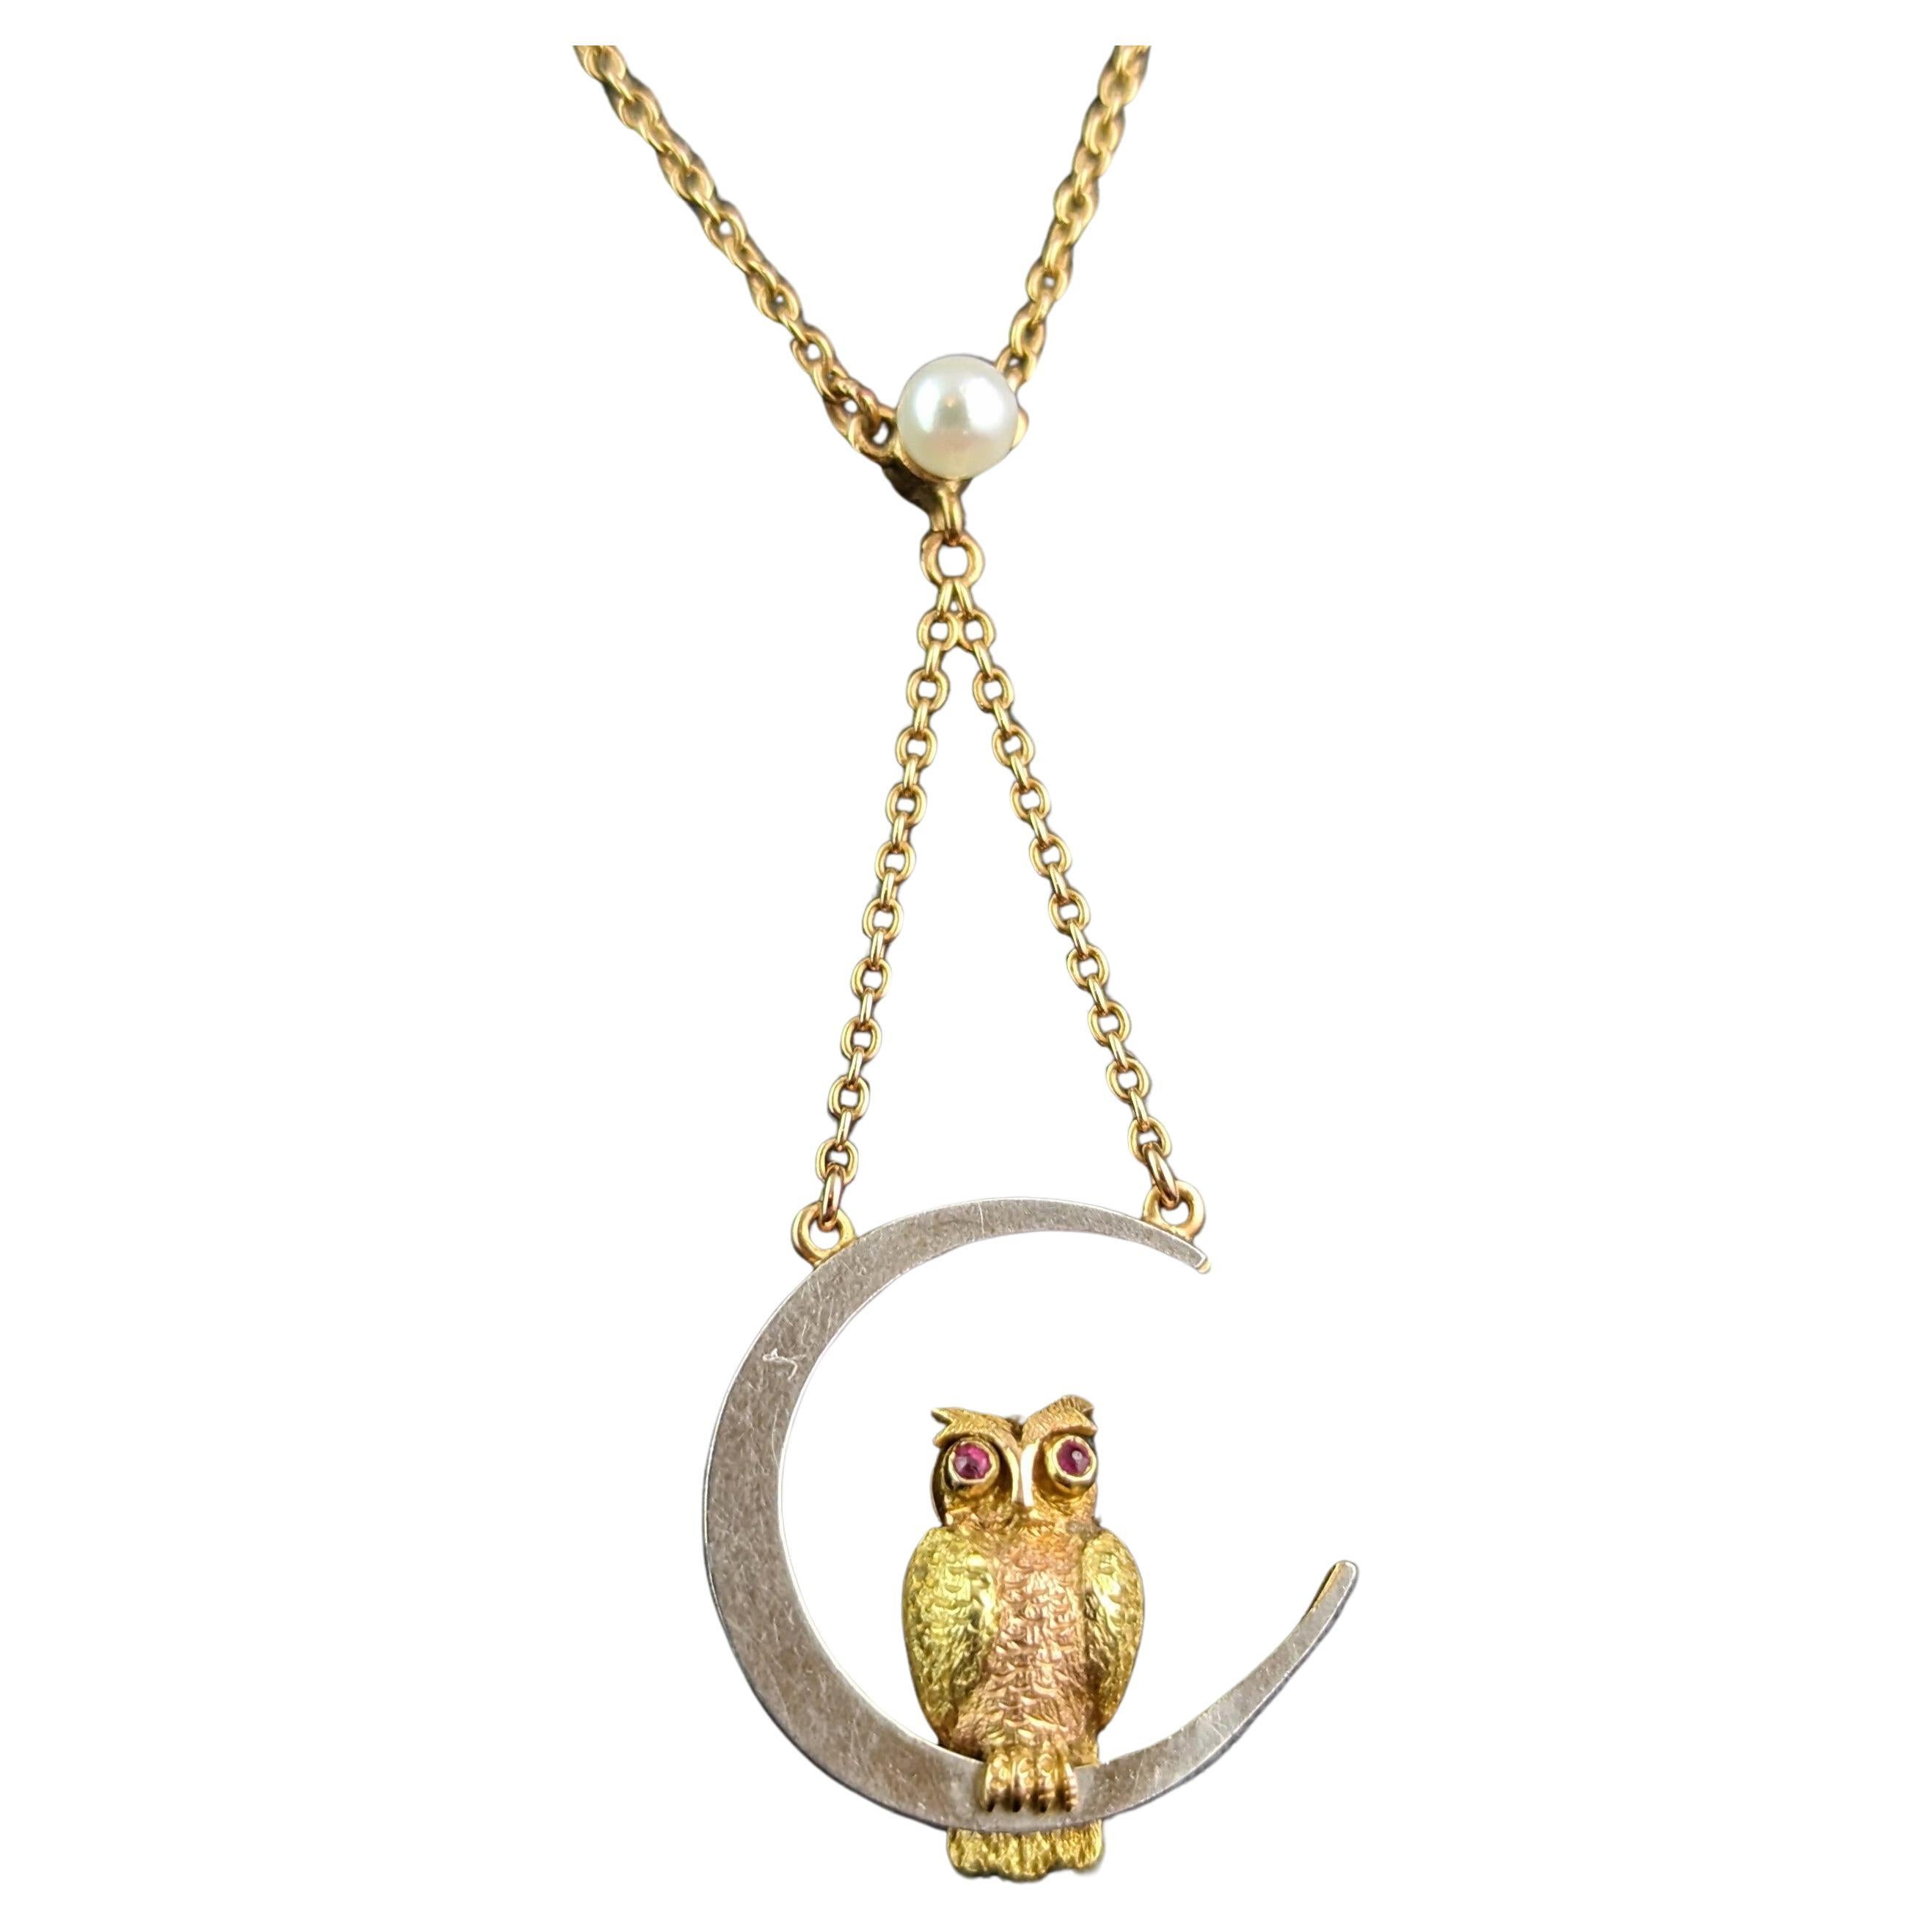 Antique Owl and Crescent moon pendant necklace, 15k gold and platinum, Ruby For Sale